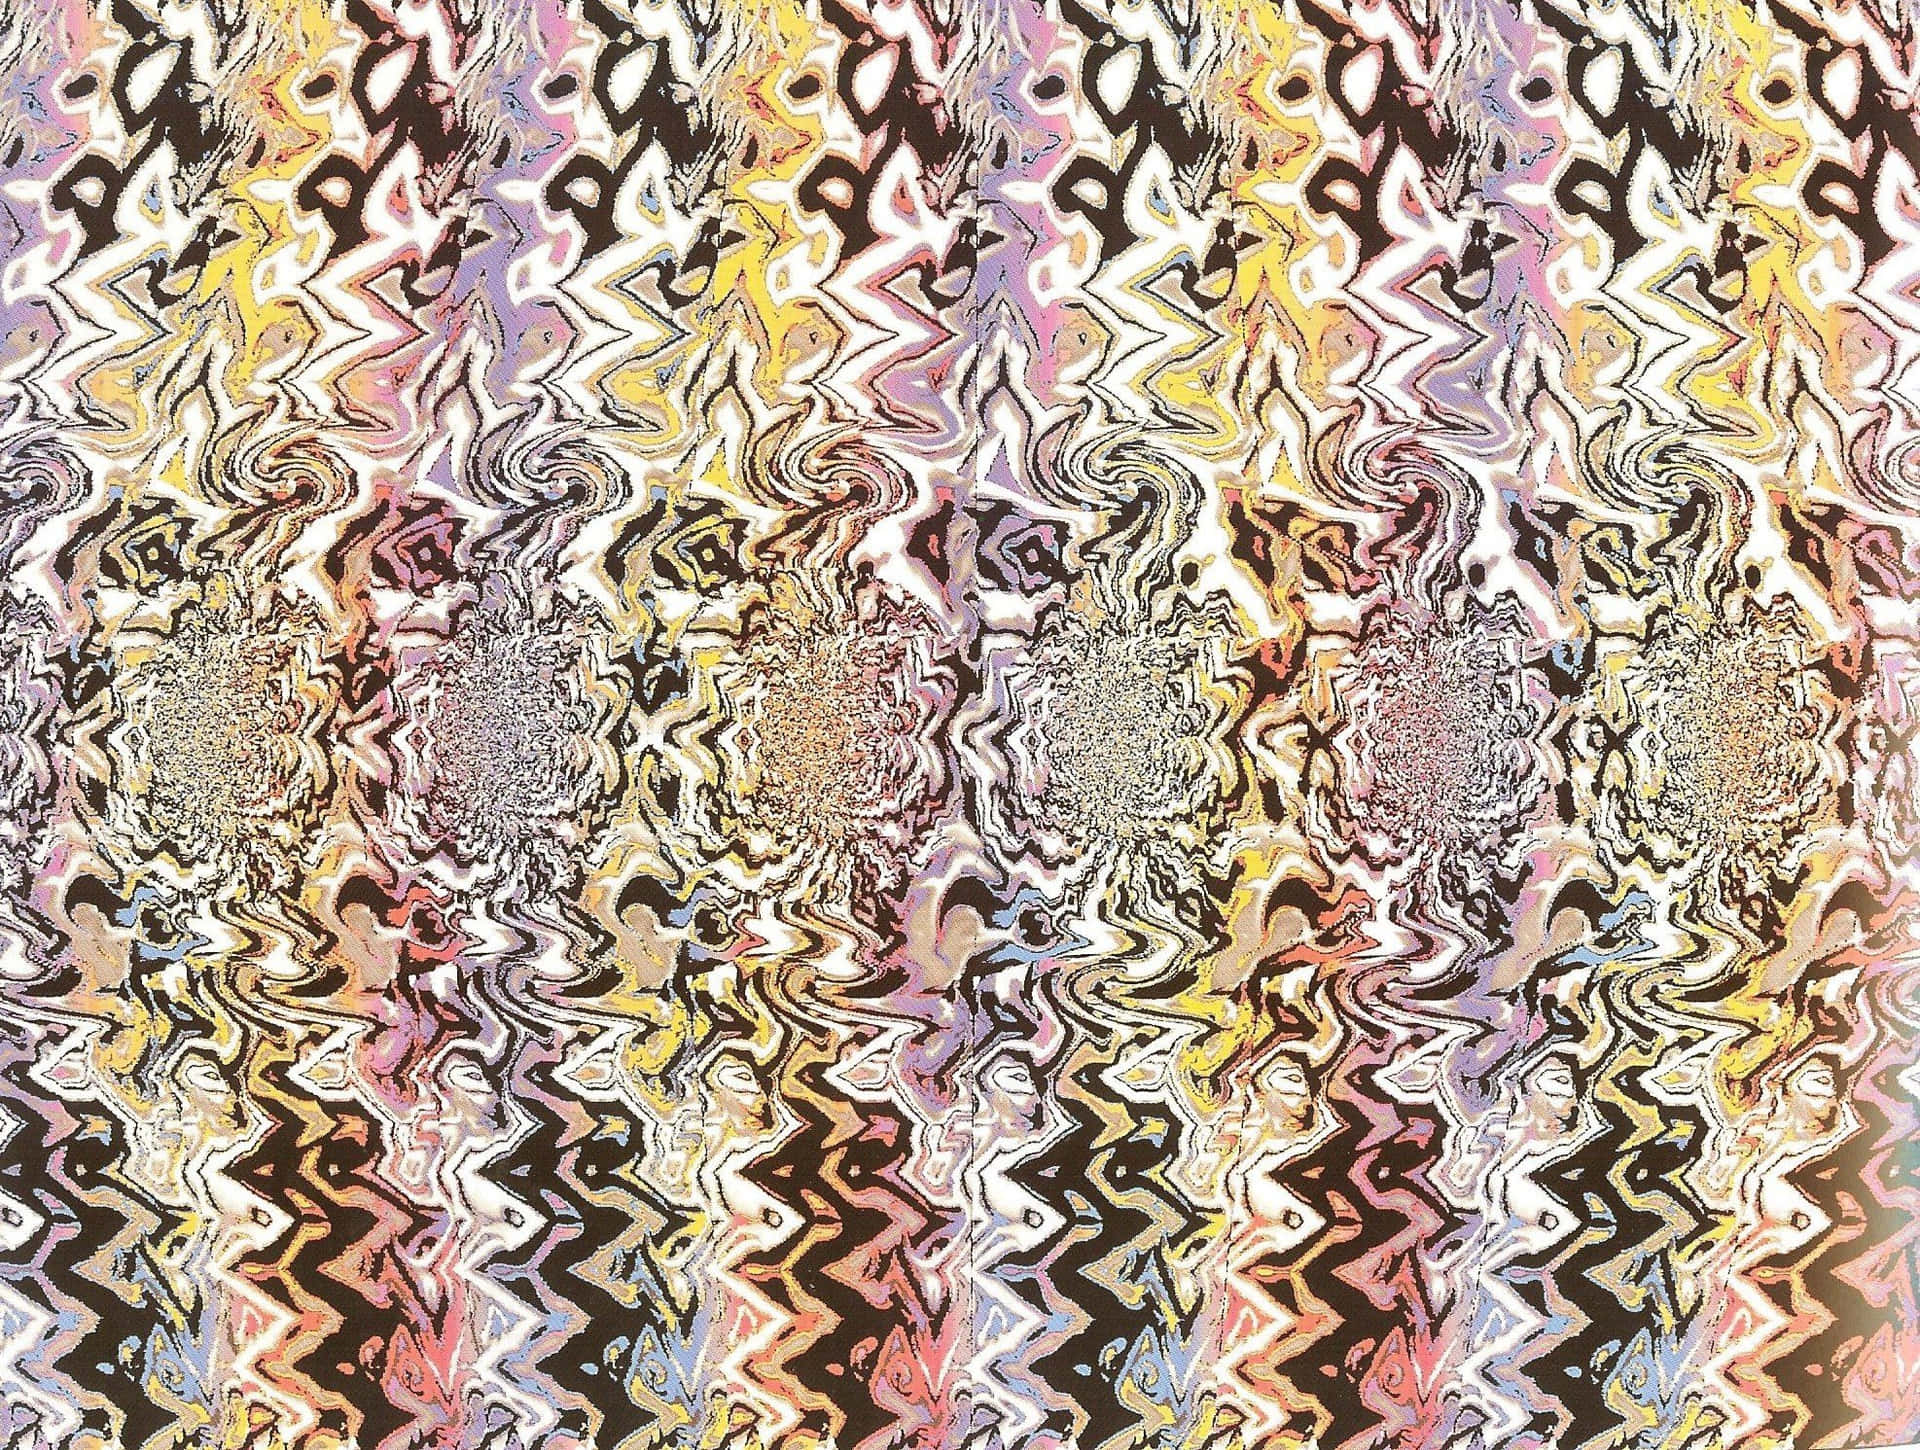 Abstract Zigzag Magic Eye 3D Stereogram Picture